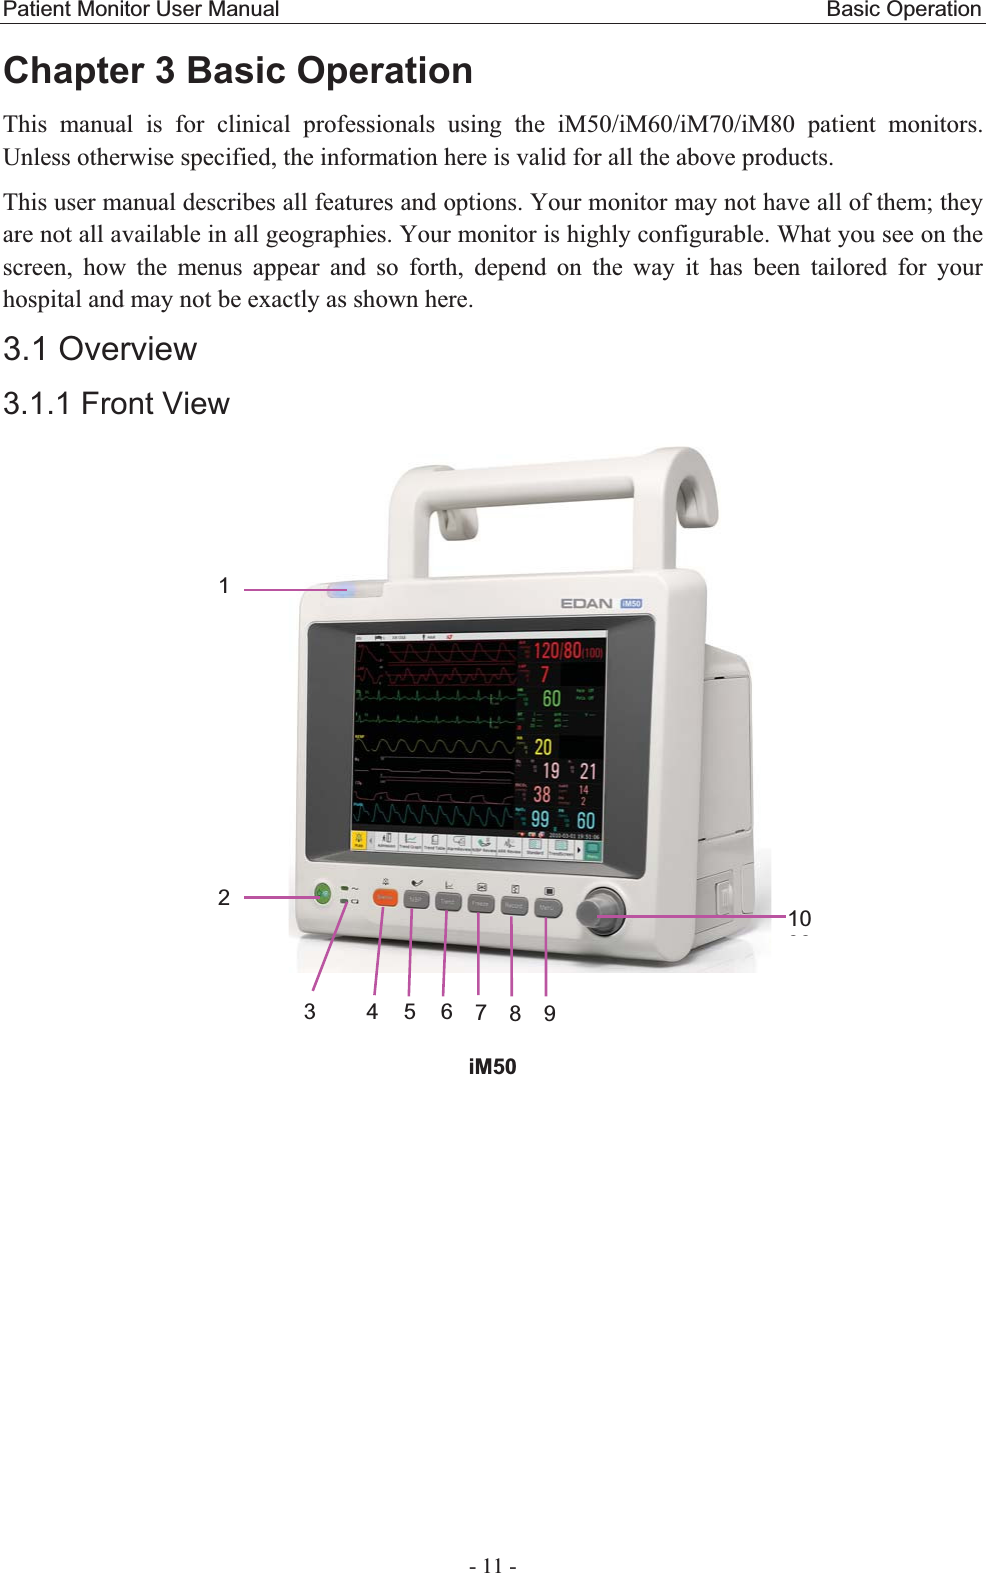 Patient Monitor User Manual                                                  Basic Operation  - 11 - Chapter 3 Basic Operation This manual is for clinical professionals using the iM50/iM60/iM70/iM80 patient monitors. Unless otherwise specified, the information here is valid for all the above products.   This user manual describes all features and options. Your monitor may not have all of them; they are not all available in all geographies. Your monitor is highly configurable. What you see on the screen, how the menus appear and so forth, depend on the way it has been tailored for your hospital and may not be exactly as shown here. 3.1 Overview 3.1.1 Front View  iM50123 4 5 6 7891000